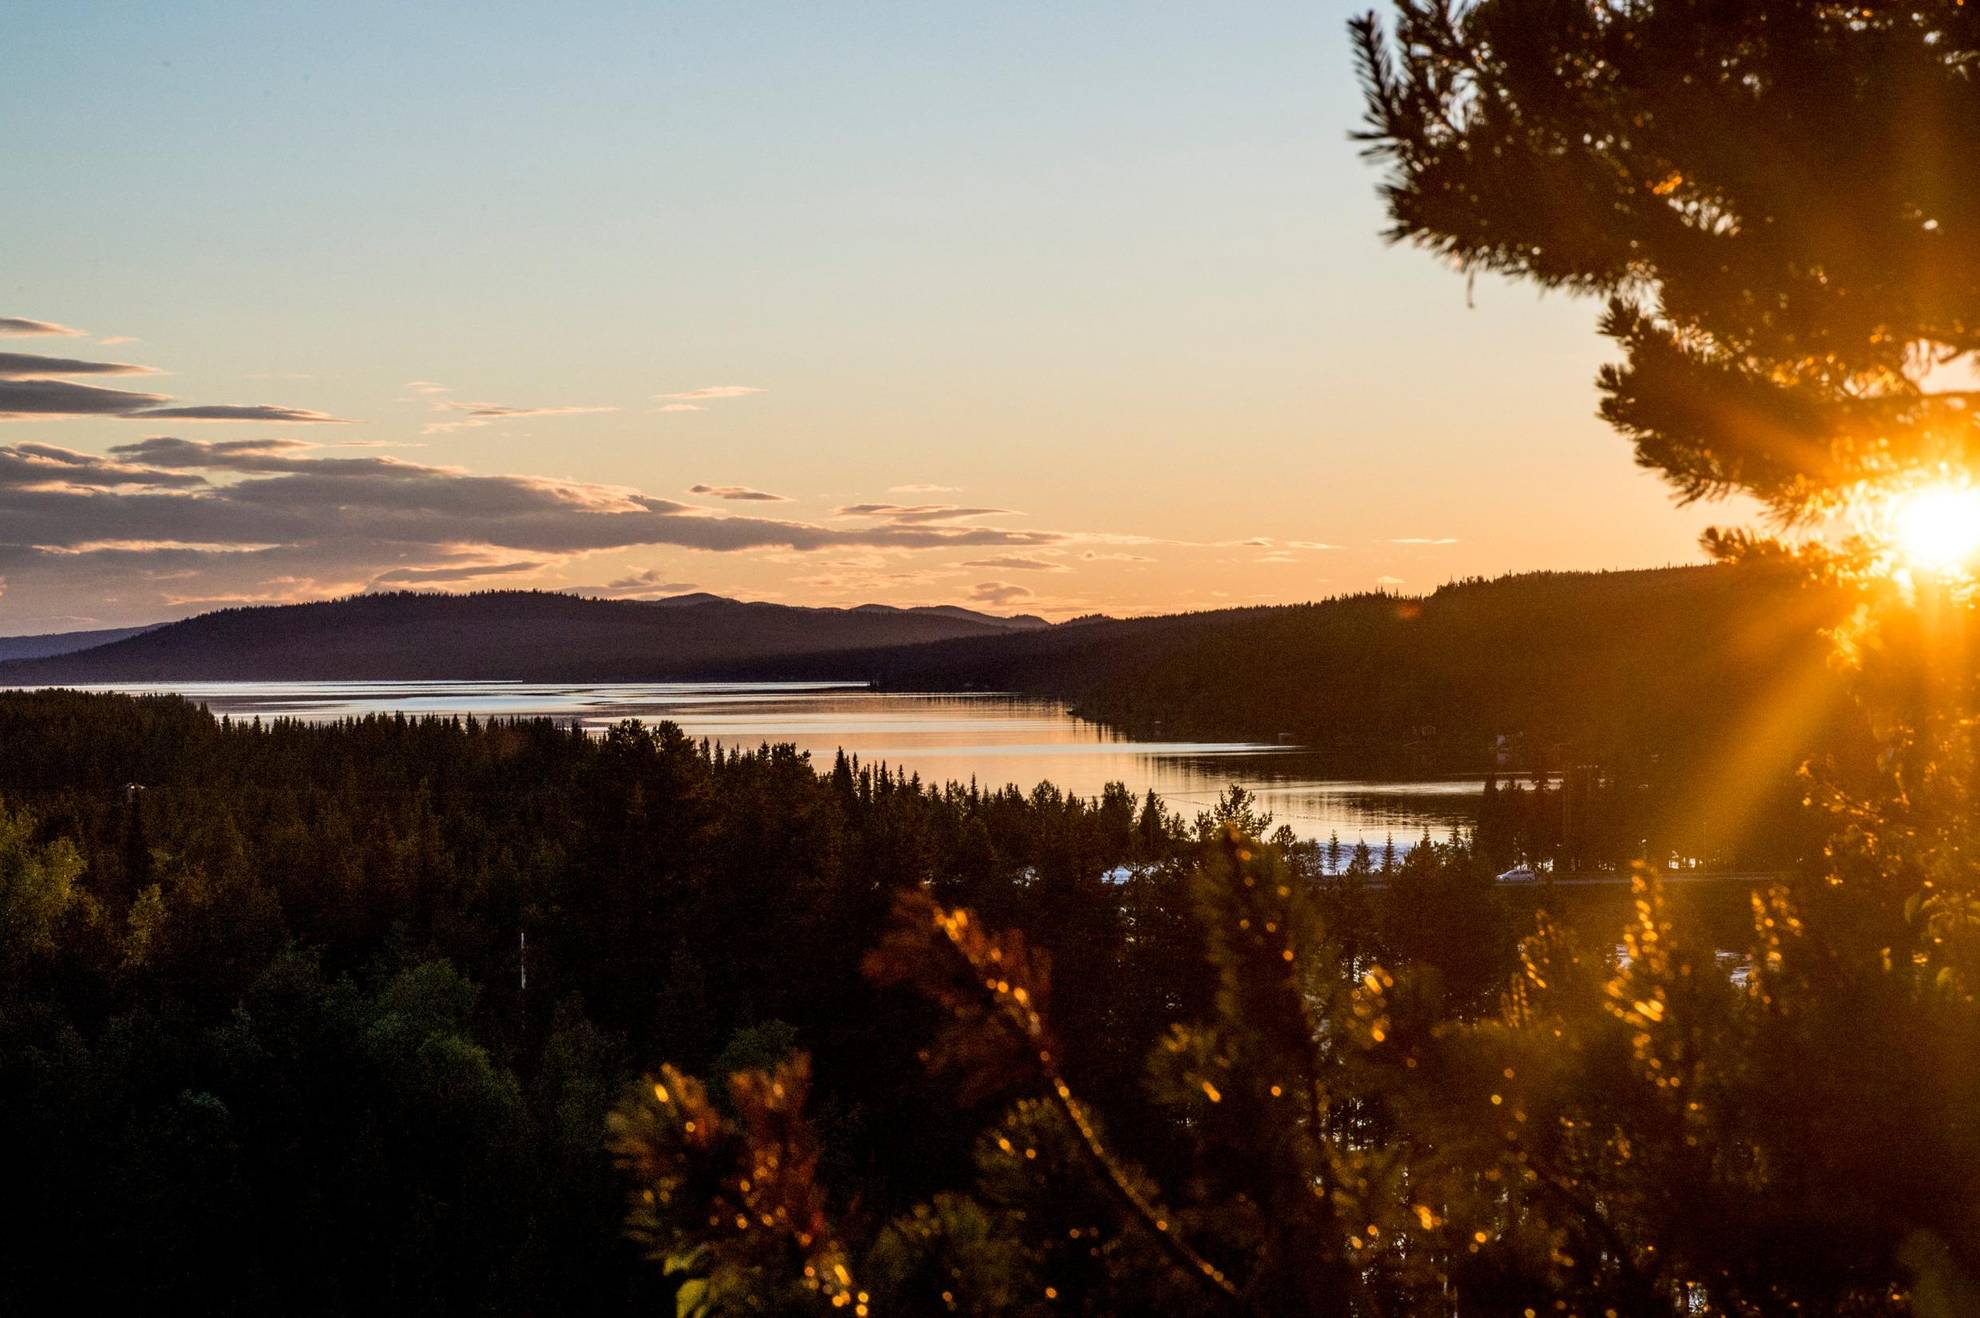 The Midnight Sun over a lake and forest in the Swedish Lapland. The mountains in the background.